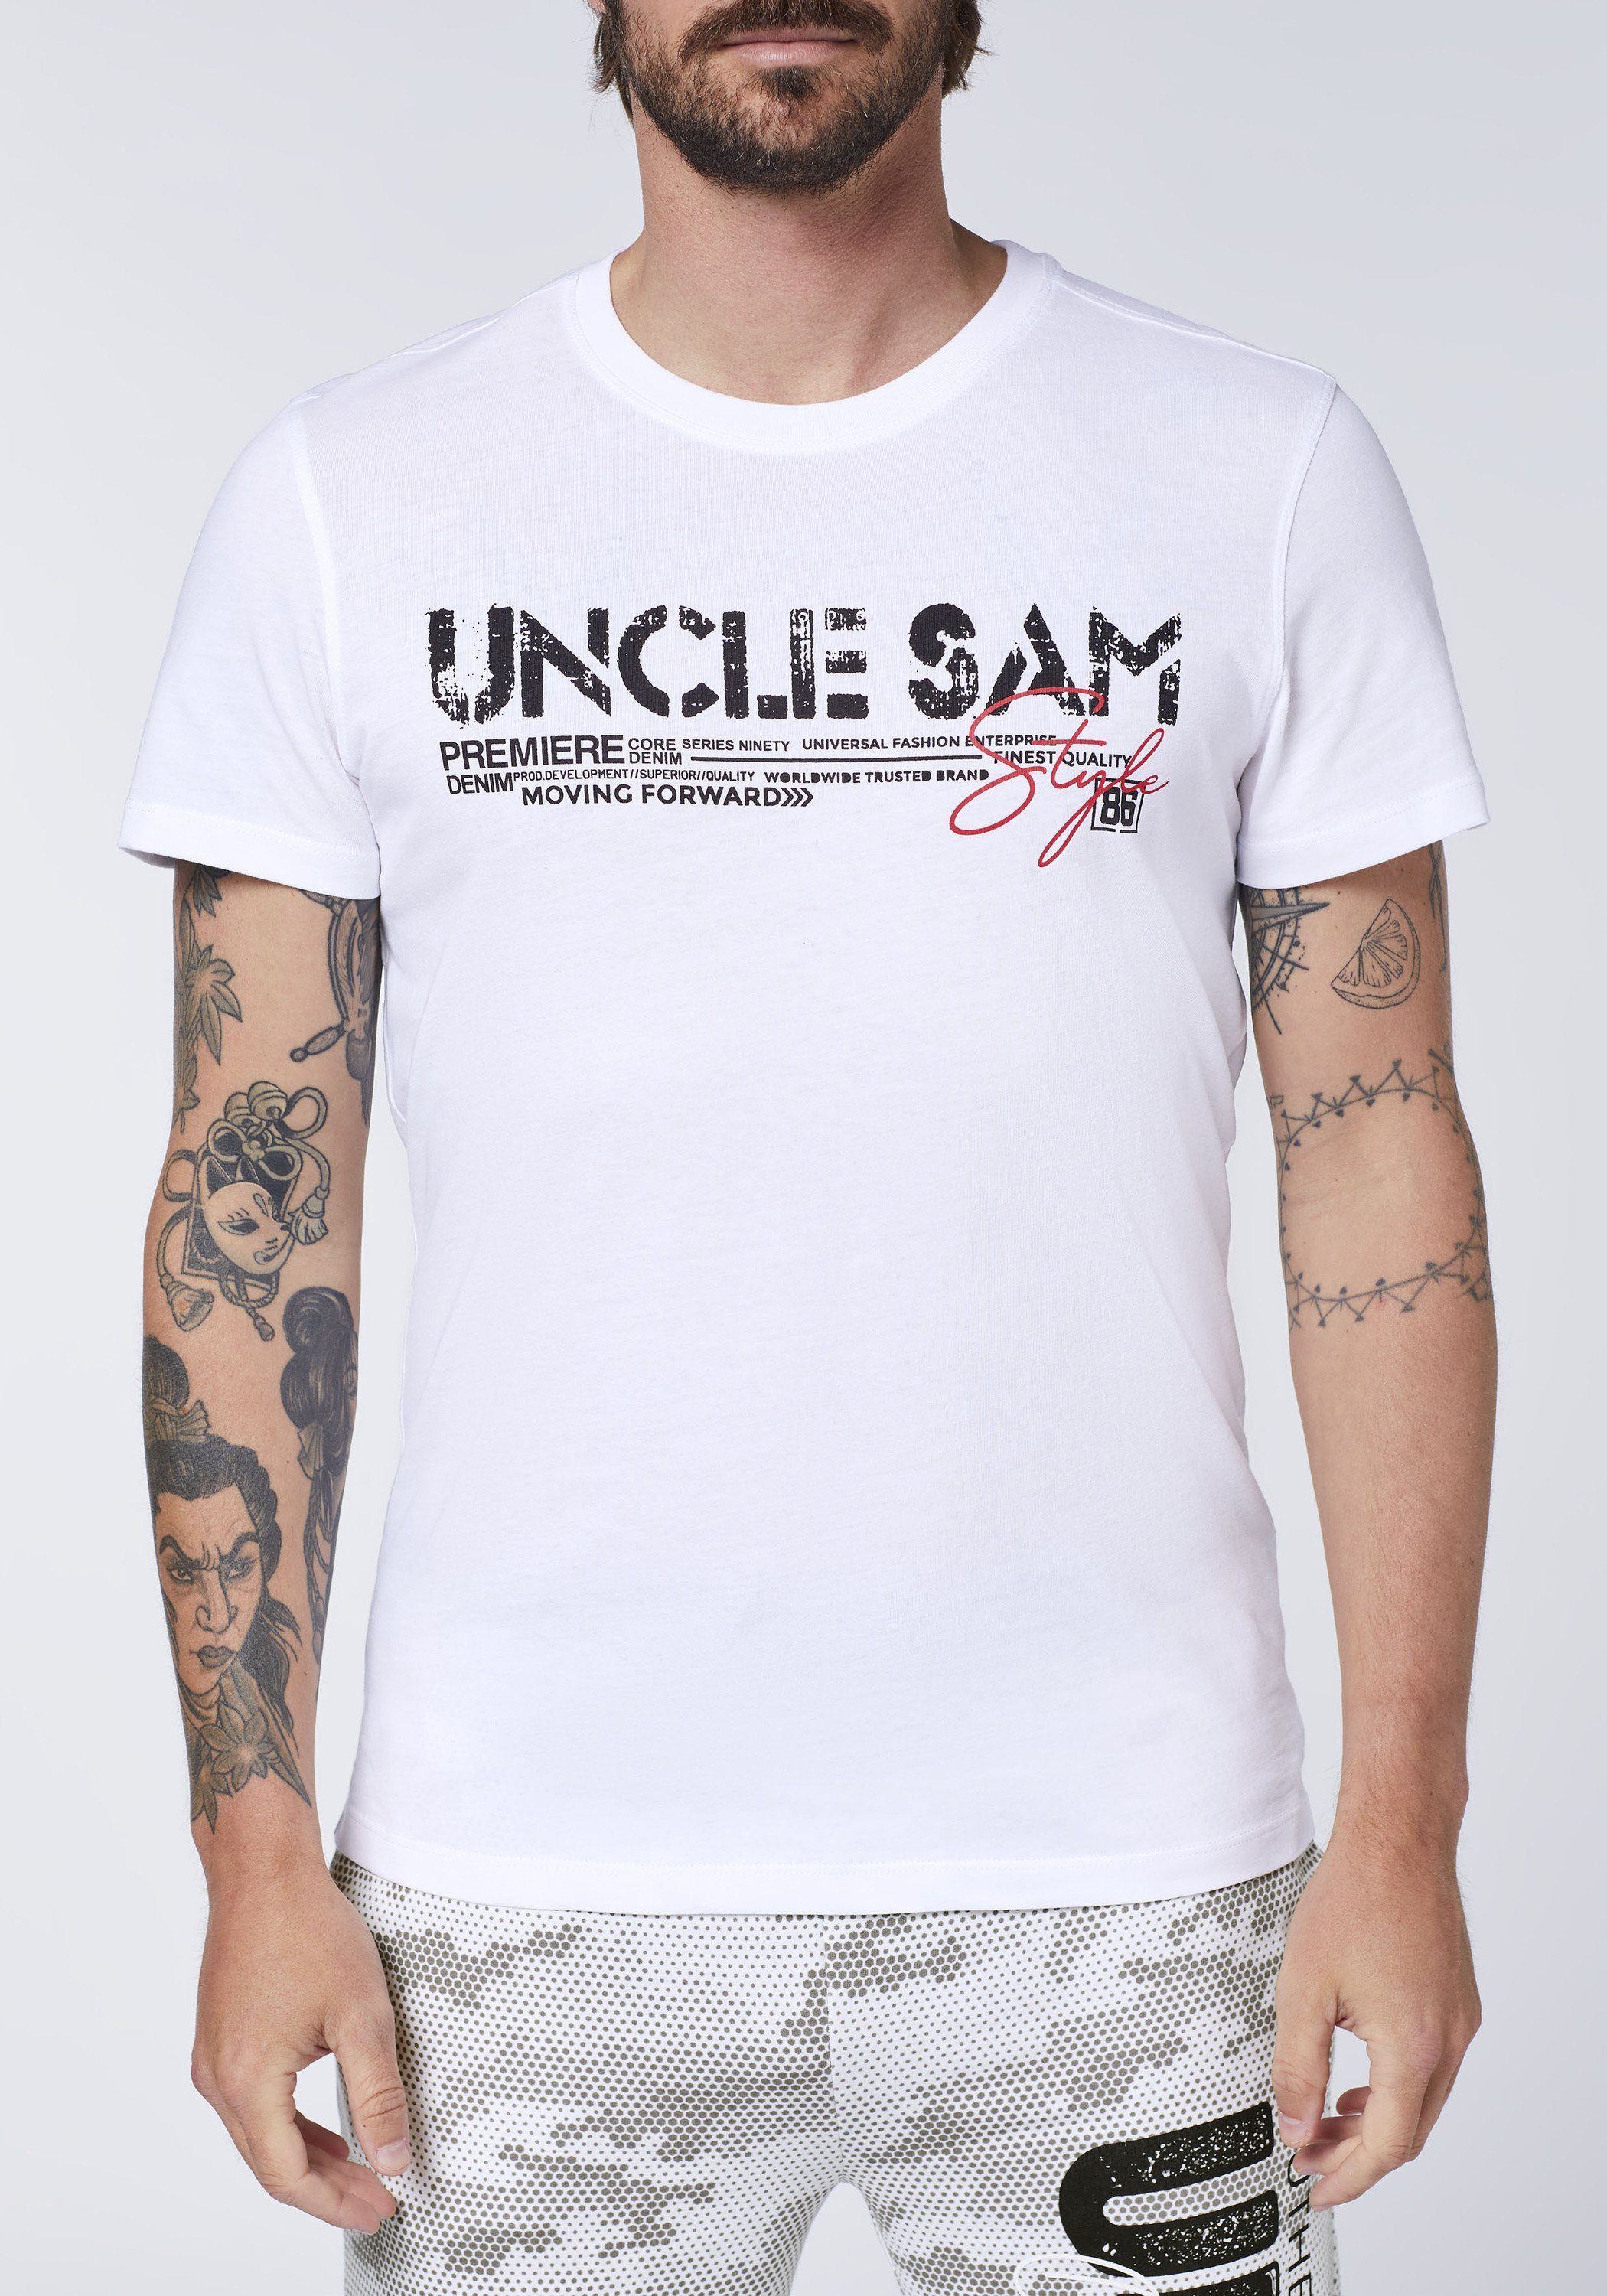 Sam Print-Shirt Passform in 11-0601 Uncle relaxter Bright White